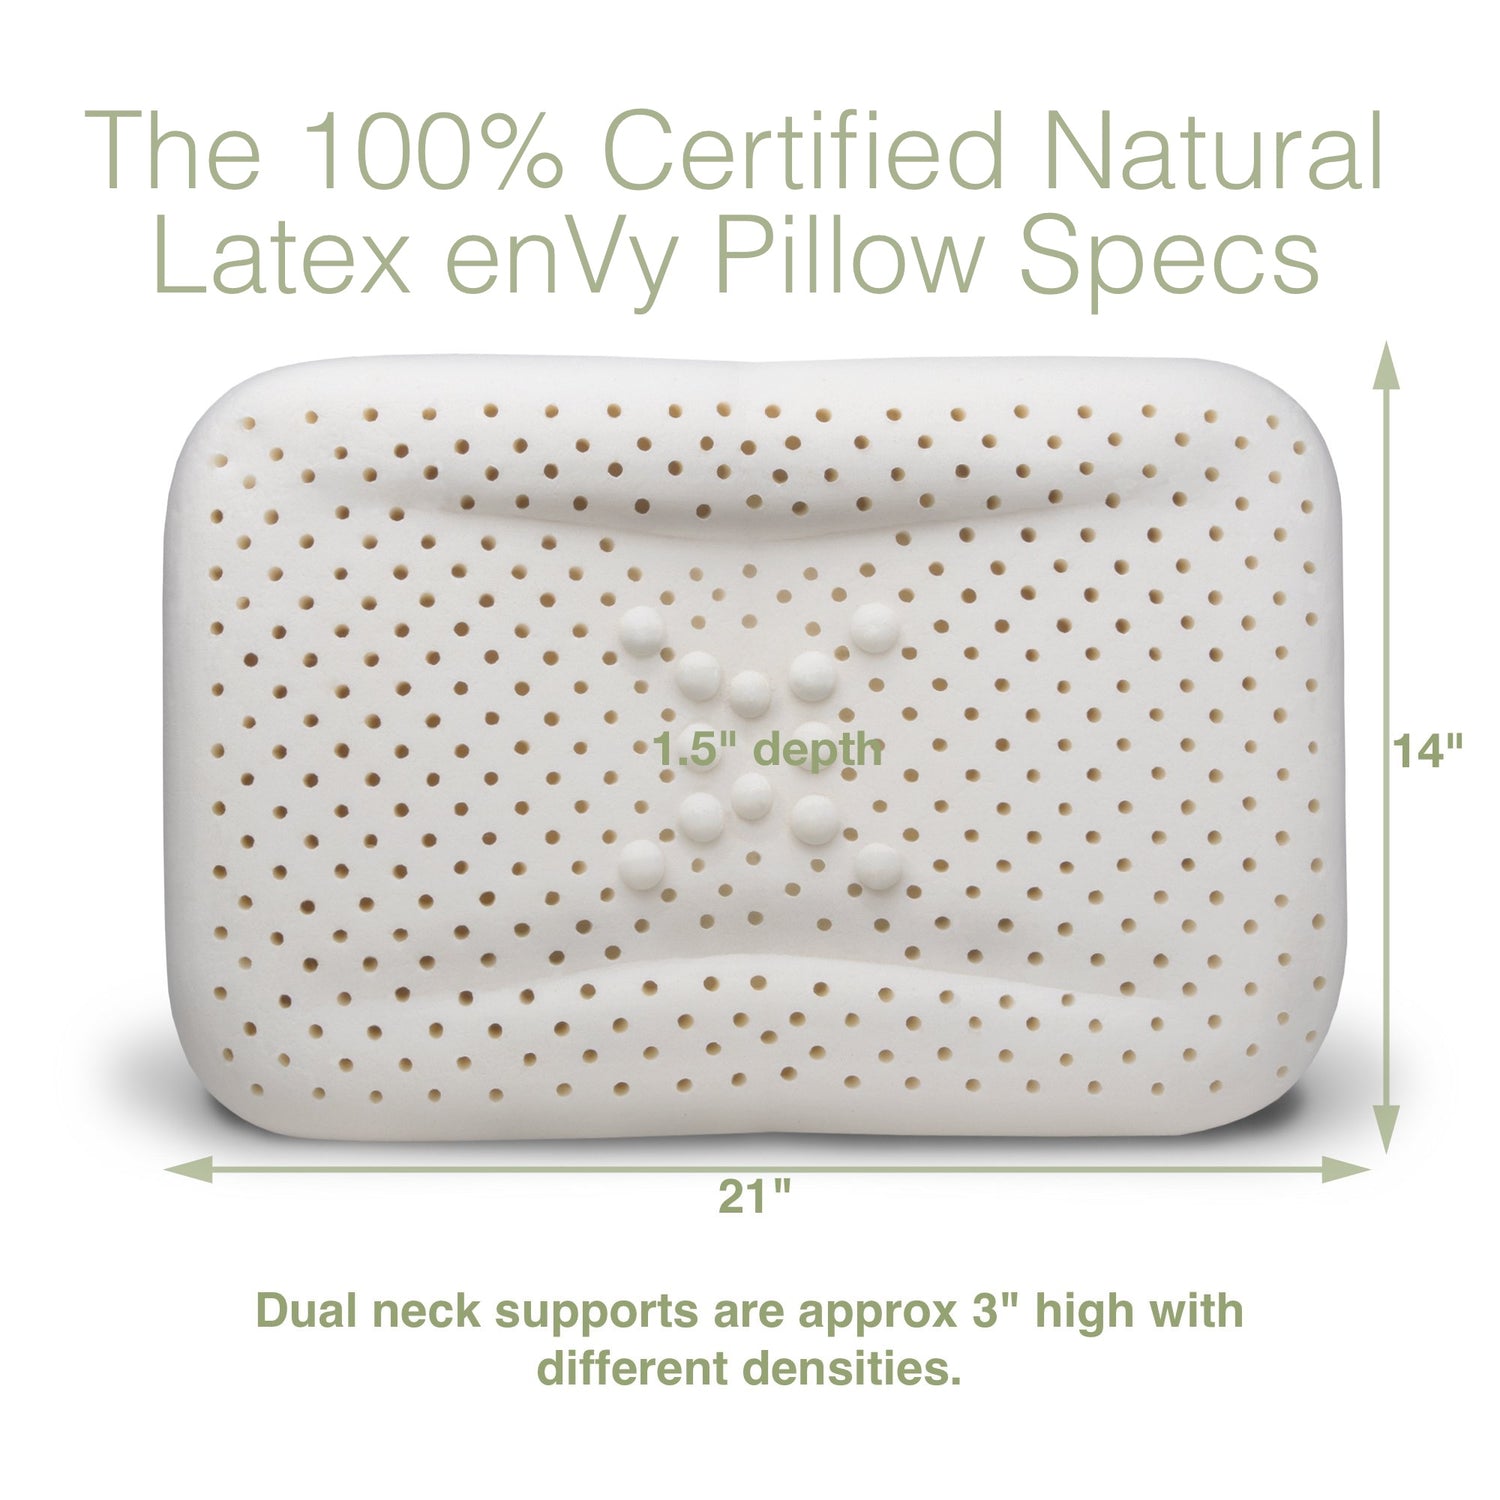 enVy® RX 100% Natural Latex PROACTIVE-Aging Pillow with Botanical TENCEL™ Pillowcase - enVy Pillow